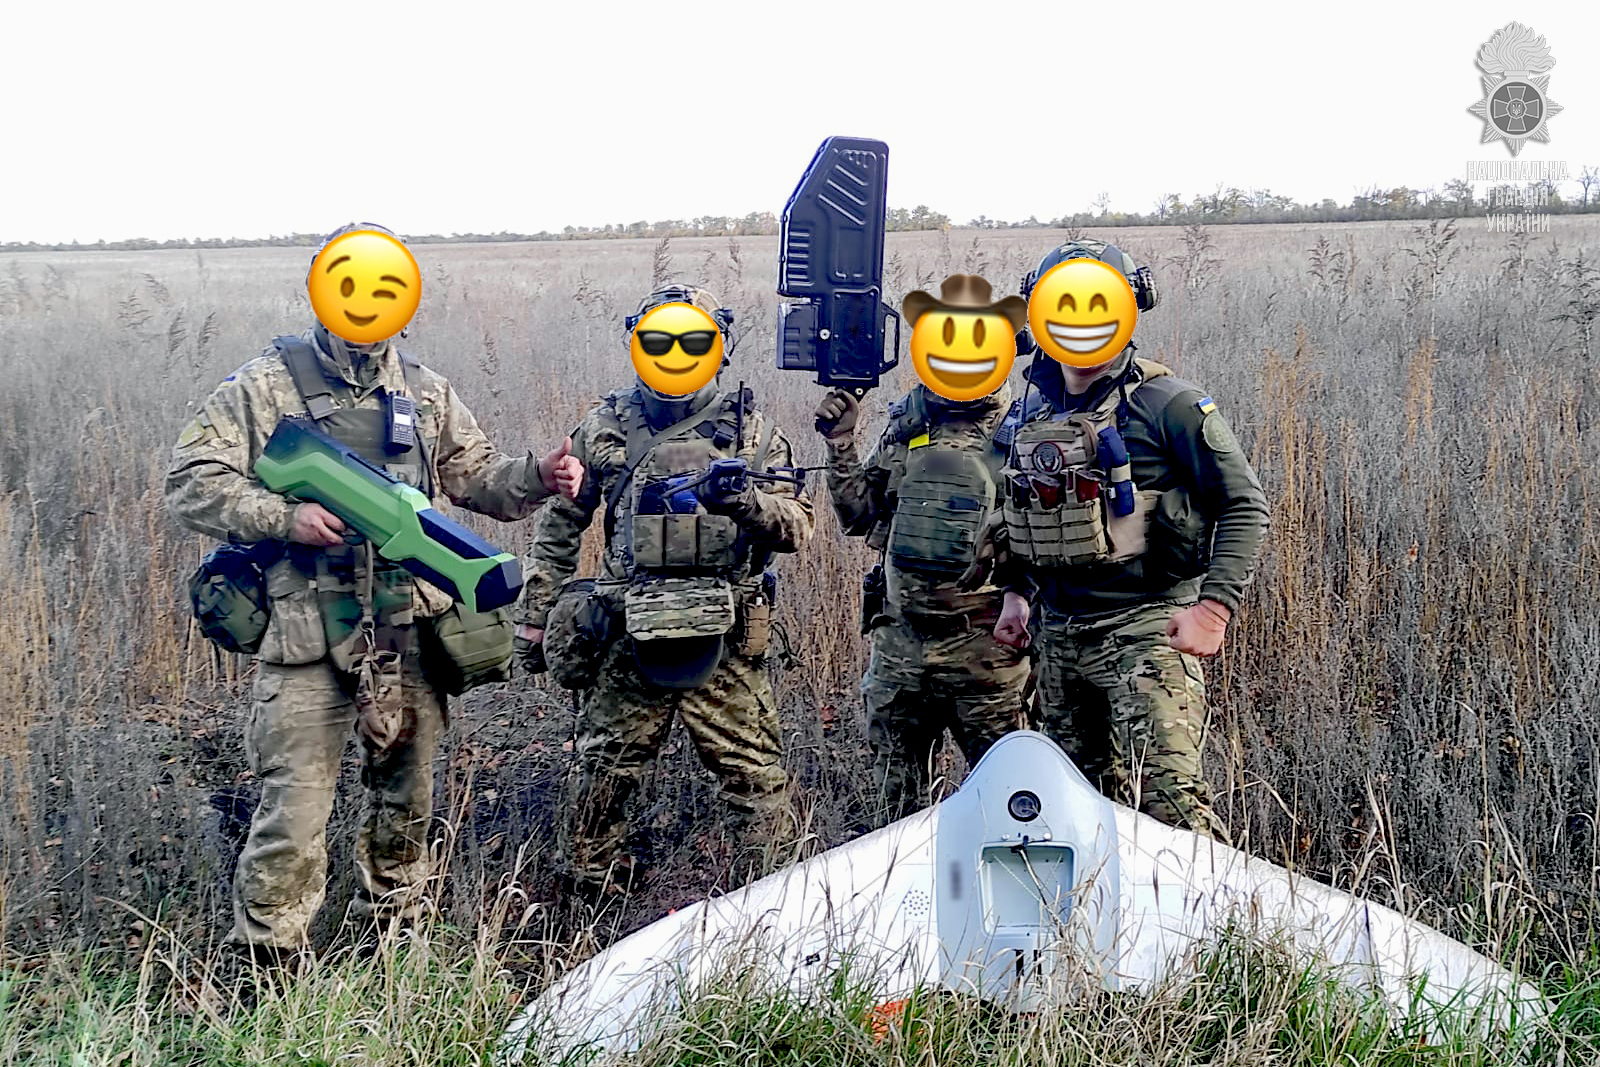 The National Guard of Ukraine captured a Russian reconnaissance drone "Gryphon 12" using ANTIDRON KVS G-6 cannon